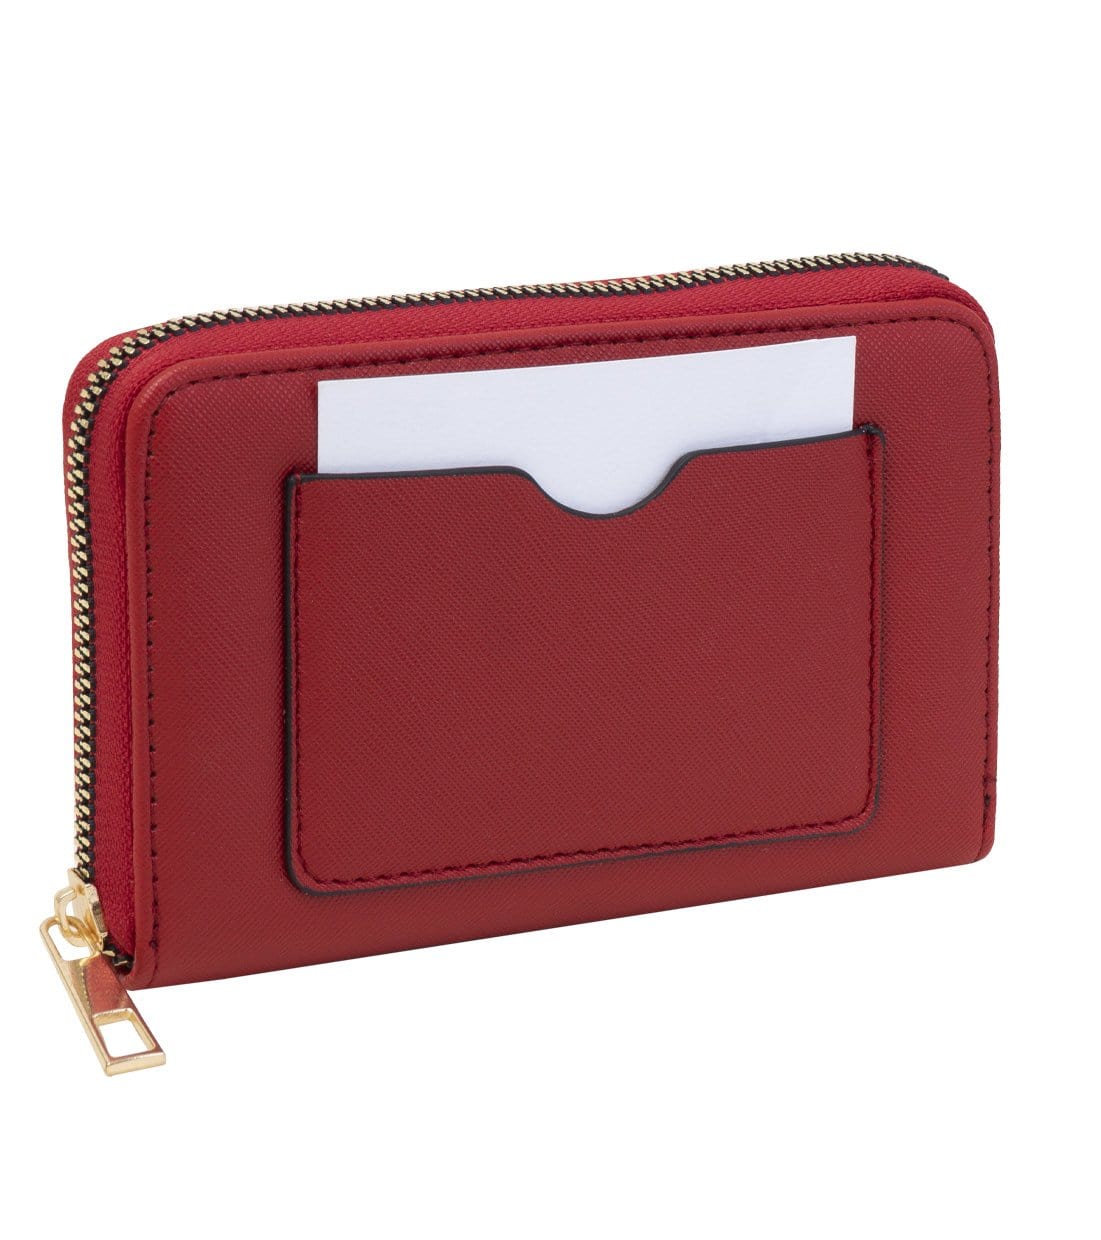 Rebecca & Rifka Vegan Saffiano Leather Zip Around Compact Indexer Wristlet Wallet With Back Credit Card Slot